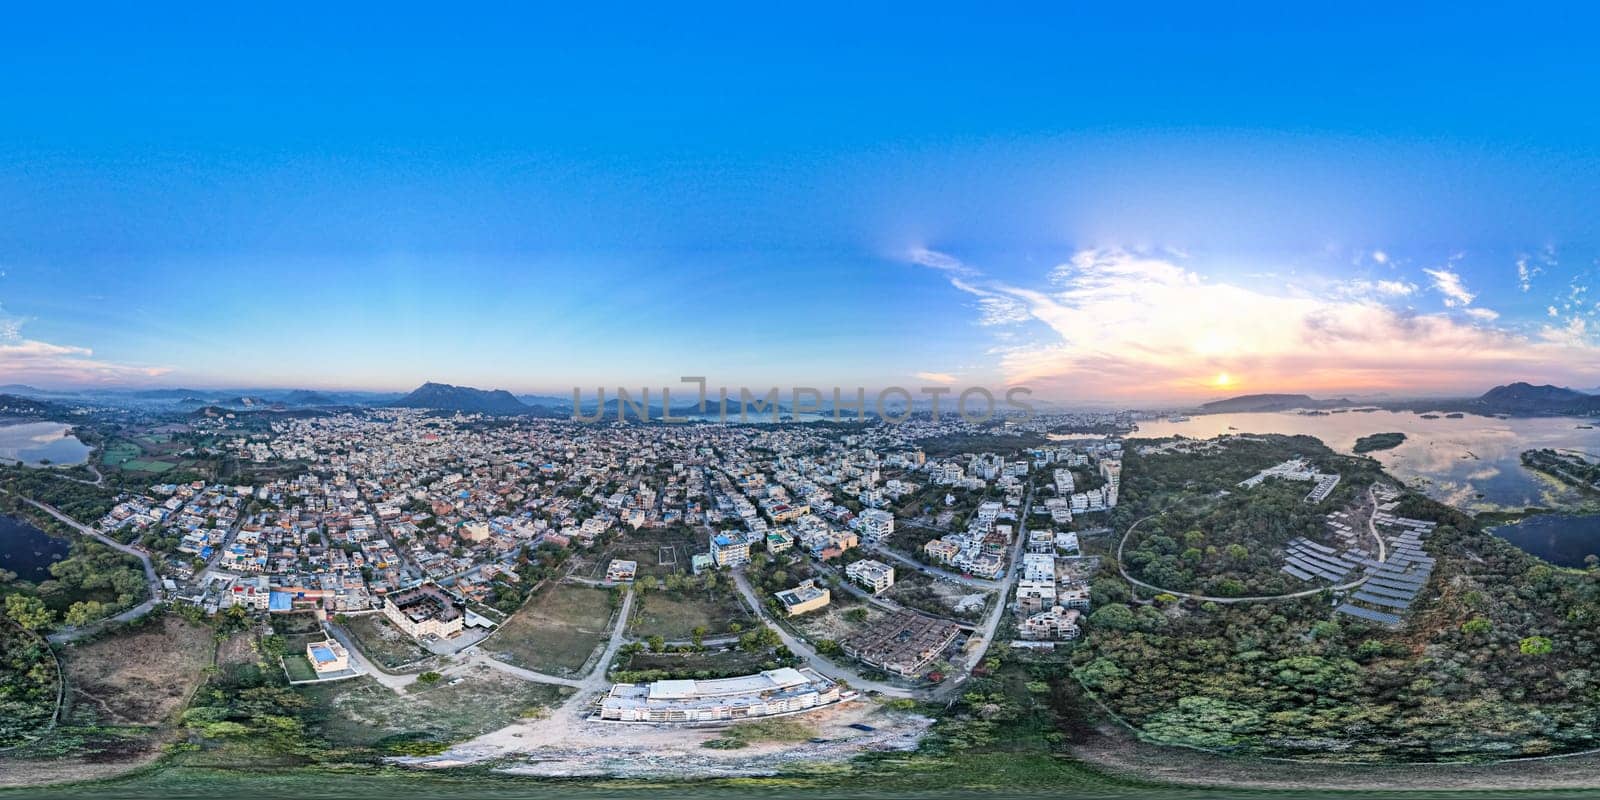 360 spherical image of cityscape of Udaipur city Rajasthan at sunset with houses and trees below and a blue sky of dawn above